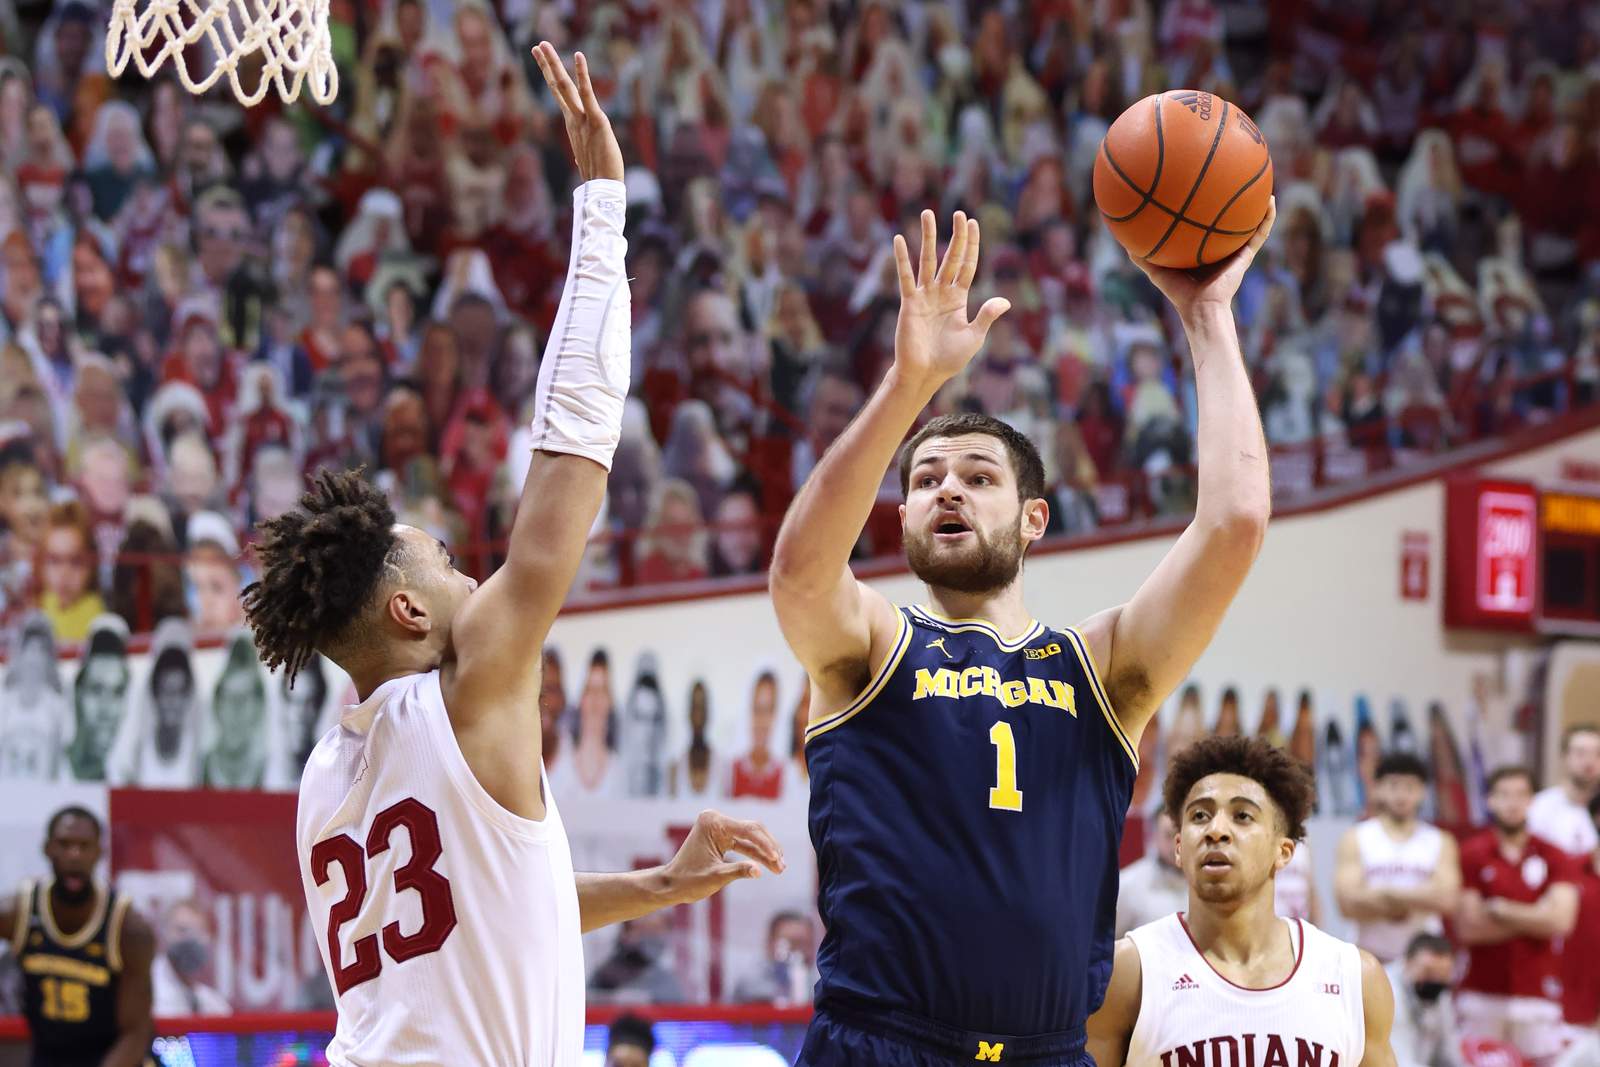 Michigan freshman Hunter Dickinson named semifinalist for college basketball Player of the Year